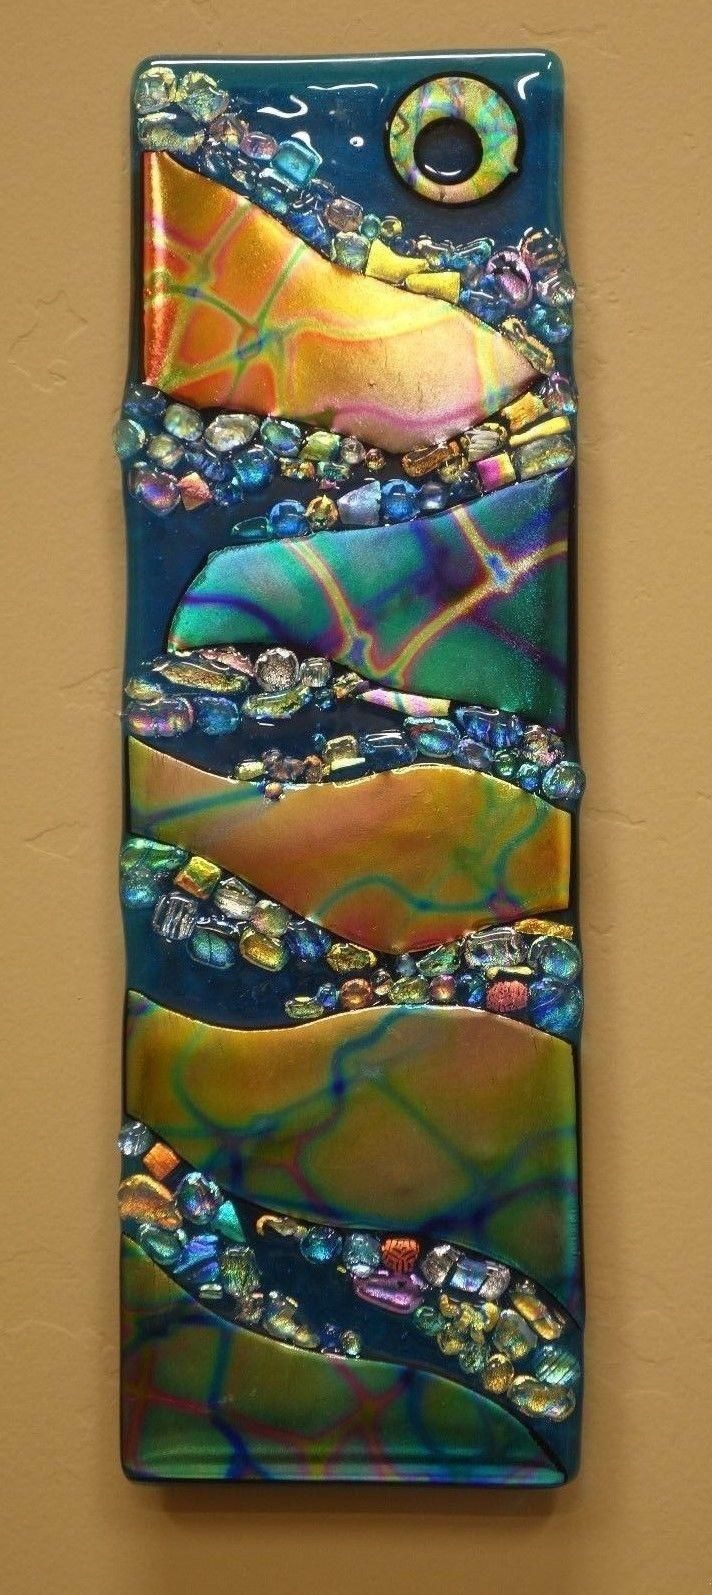 1599 Best Fusing Images On Pinterest | Fused Glass, Glass Art And Regarding Fused Glass Wall Art By Frank Thompson (Photo 14 of 20)